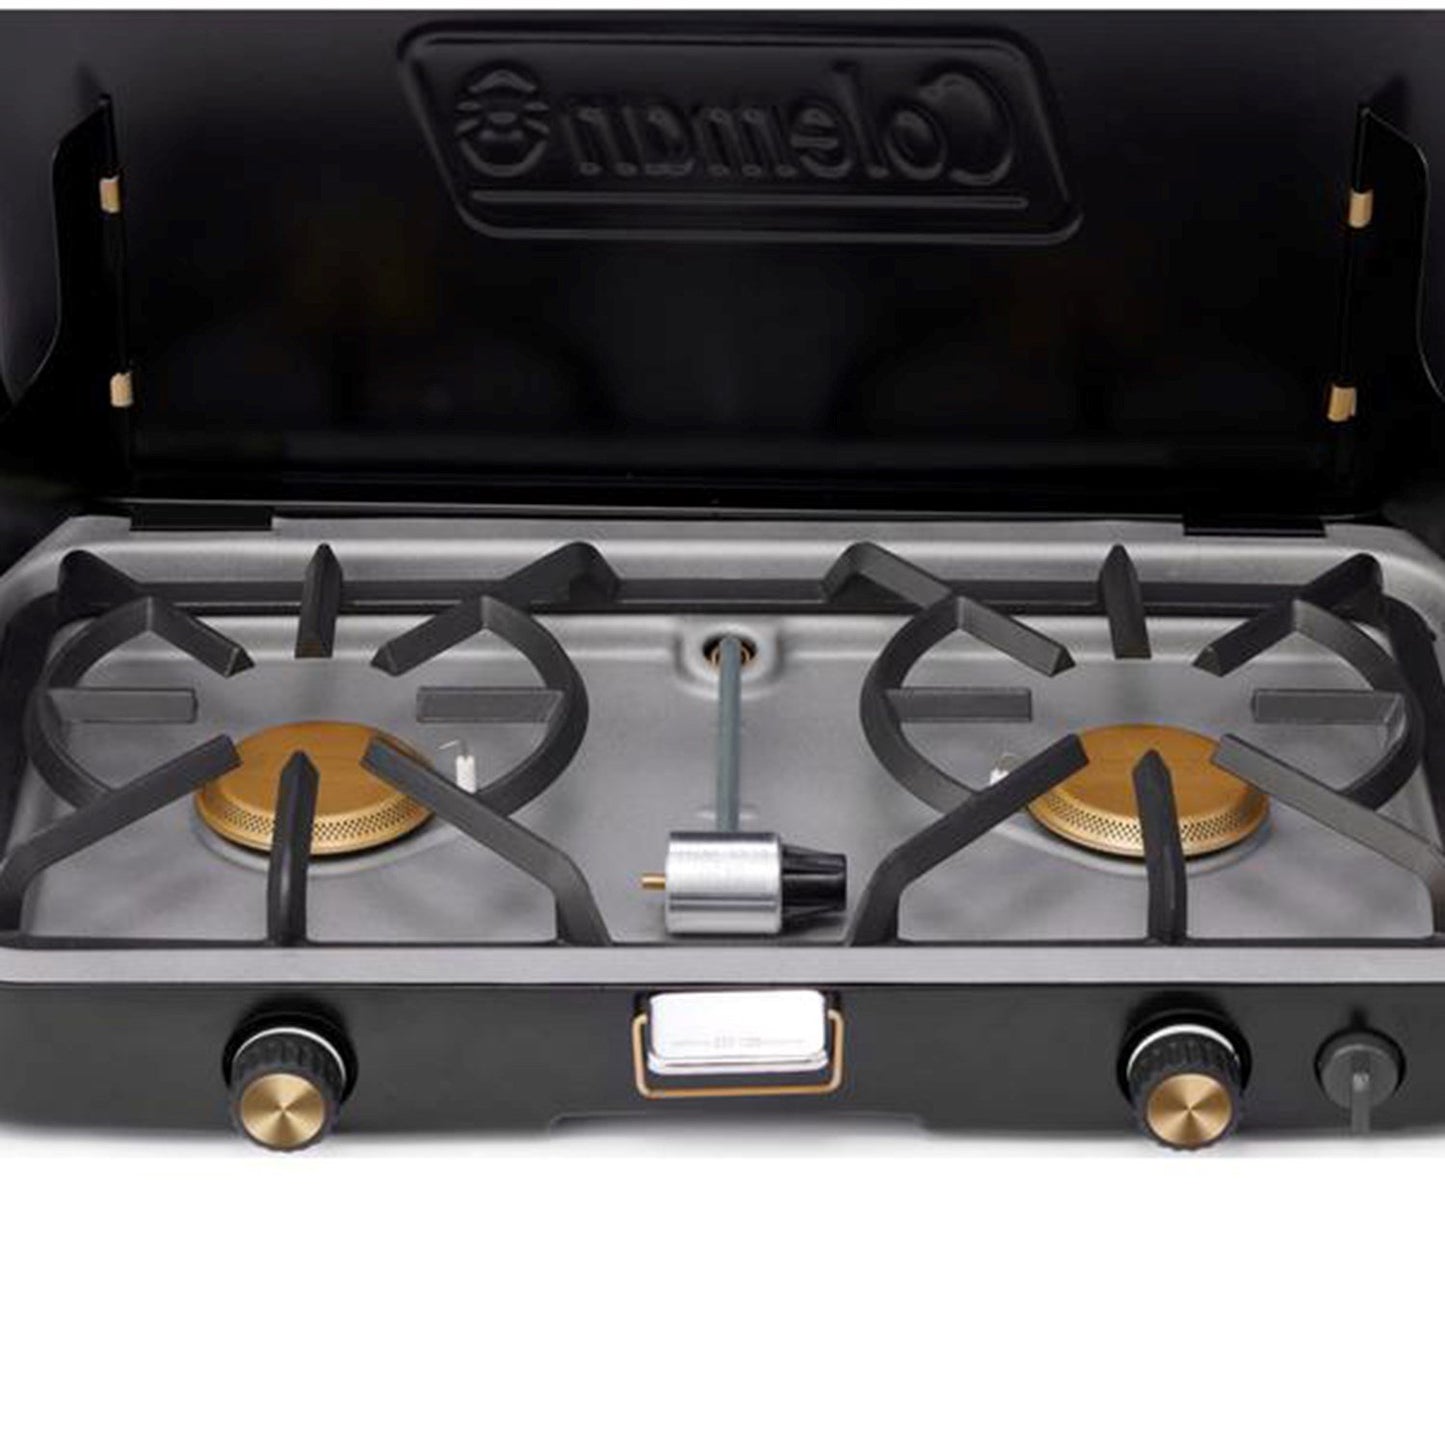 1900 Collection 3-in-1 Propane Stove